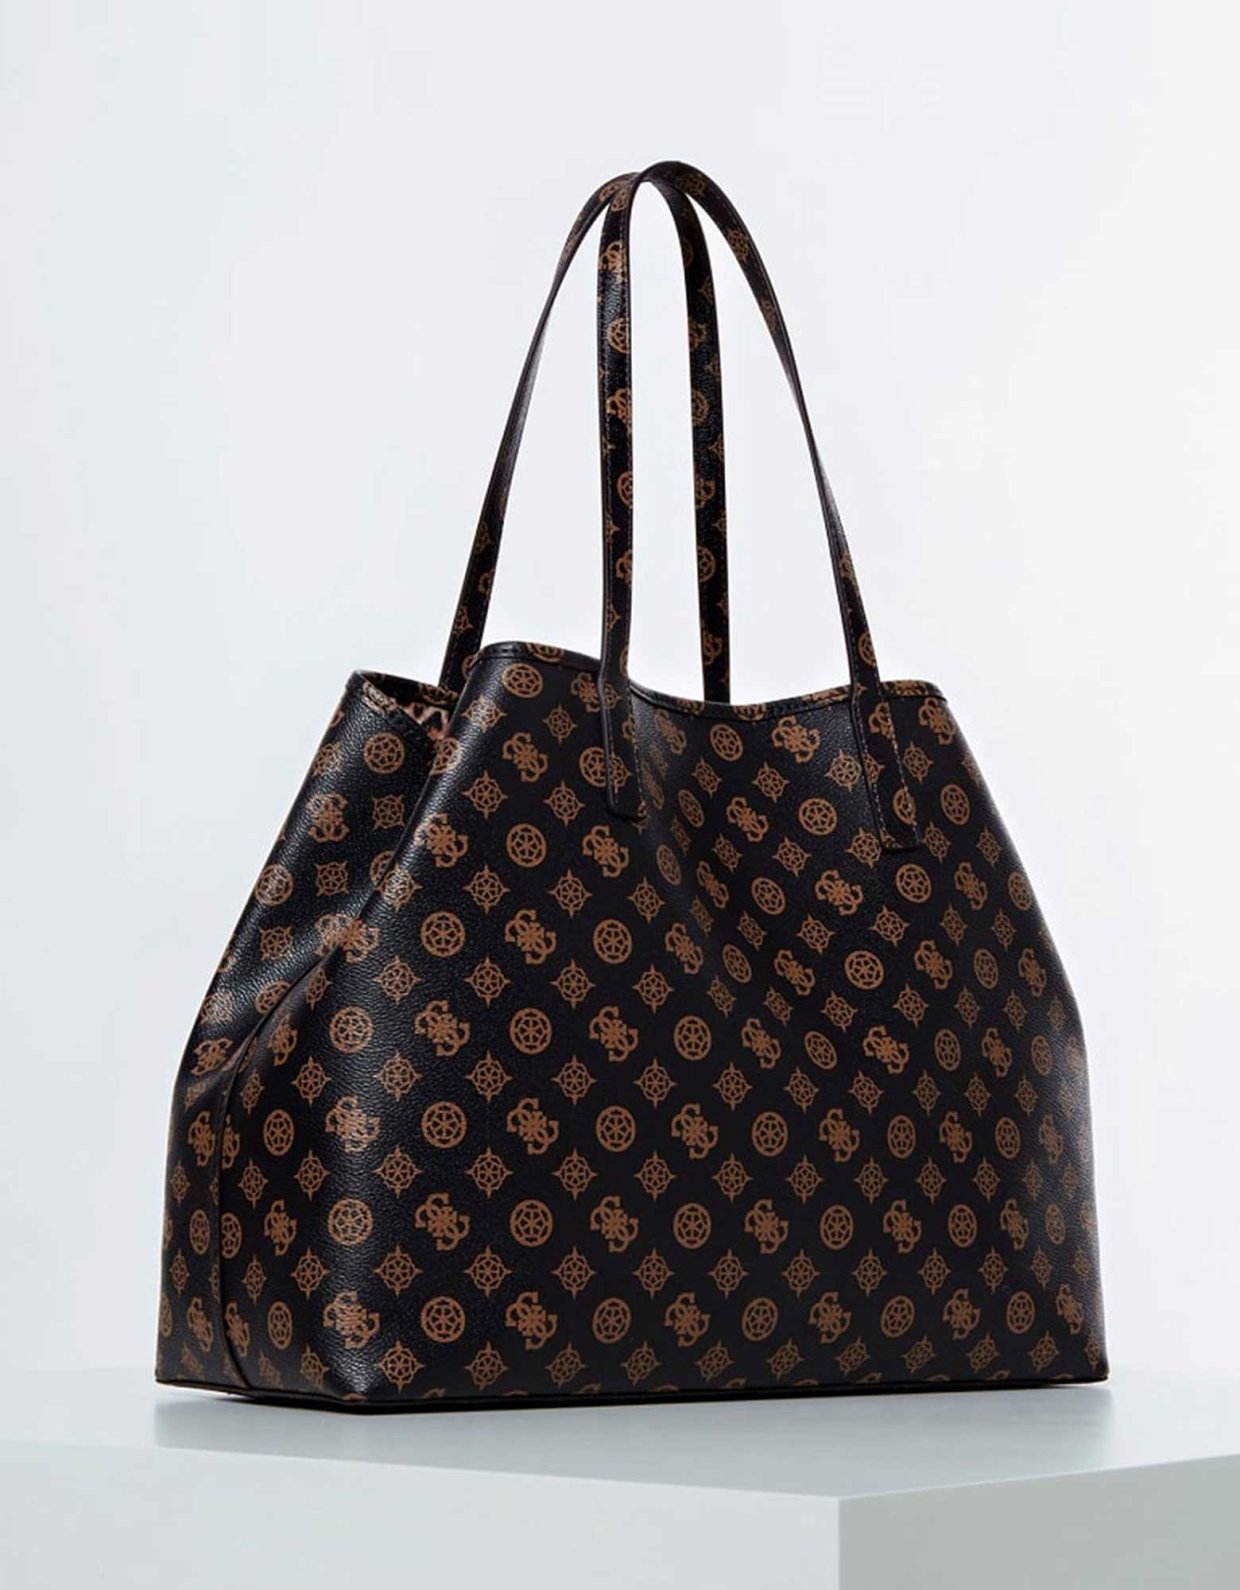 Guess Vikky Large Tote Brown